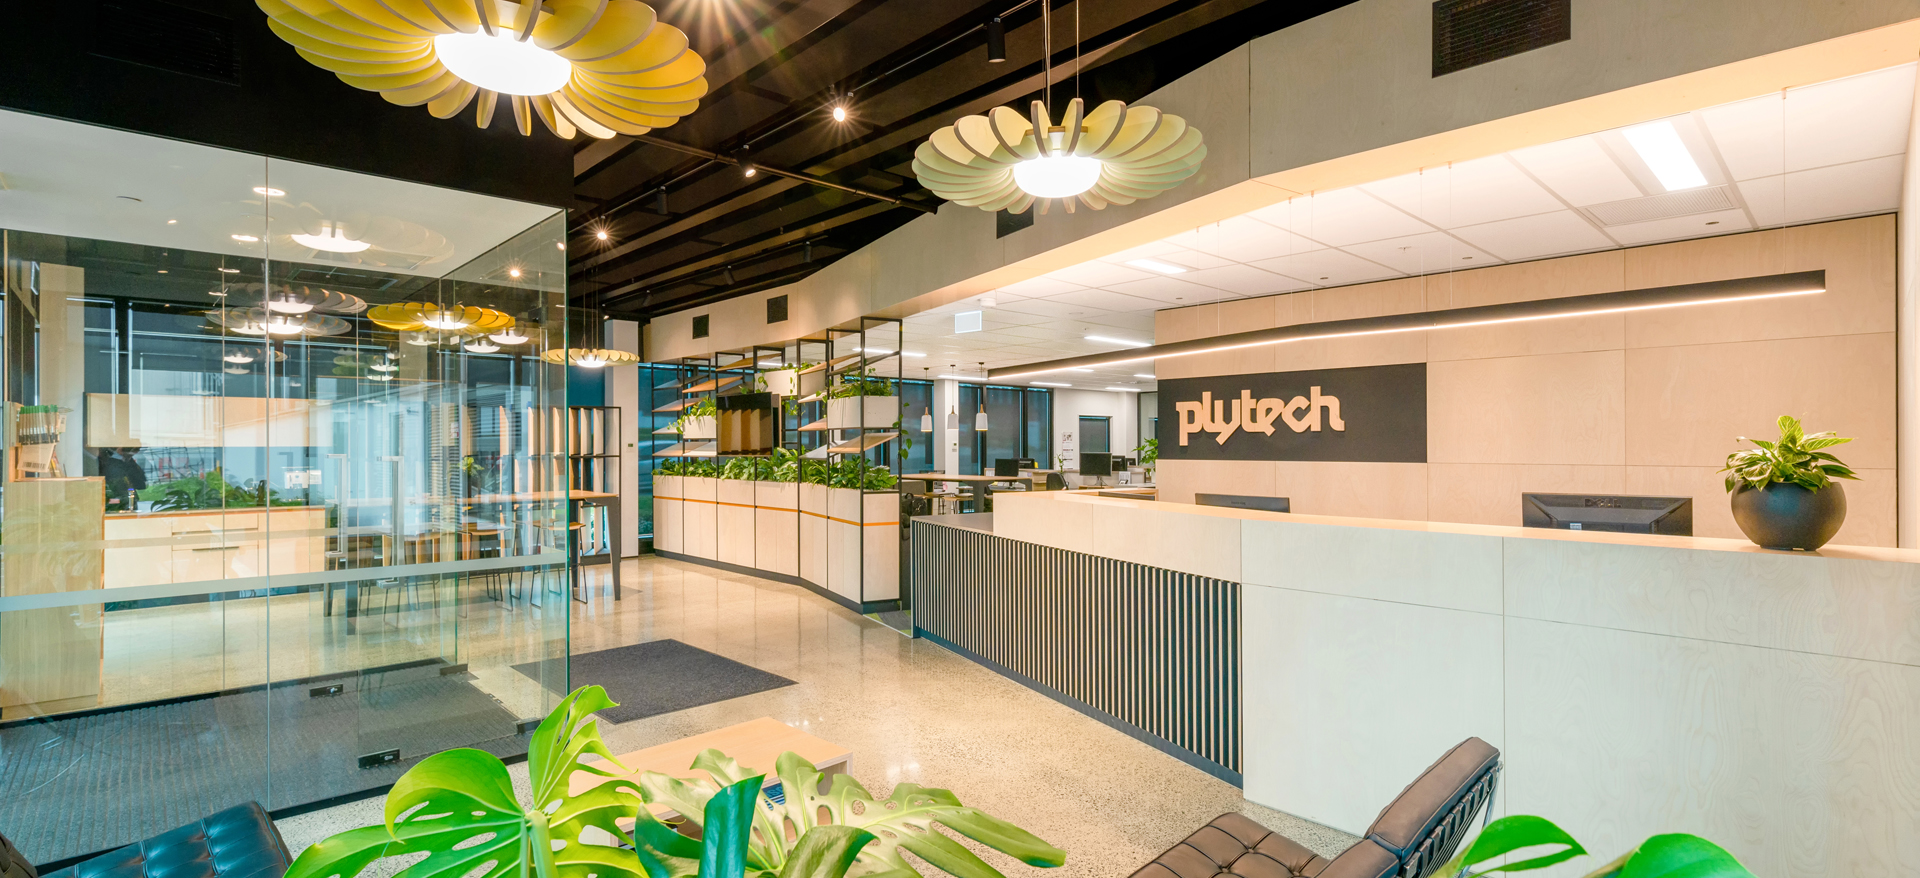 Plytech Office and Warehouse